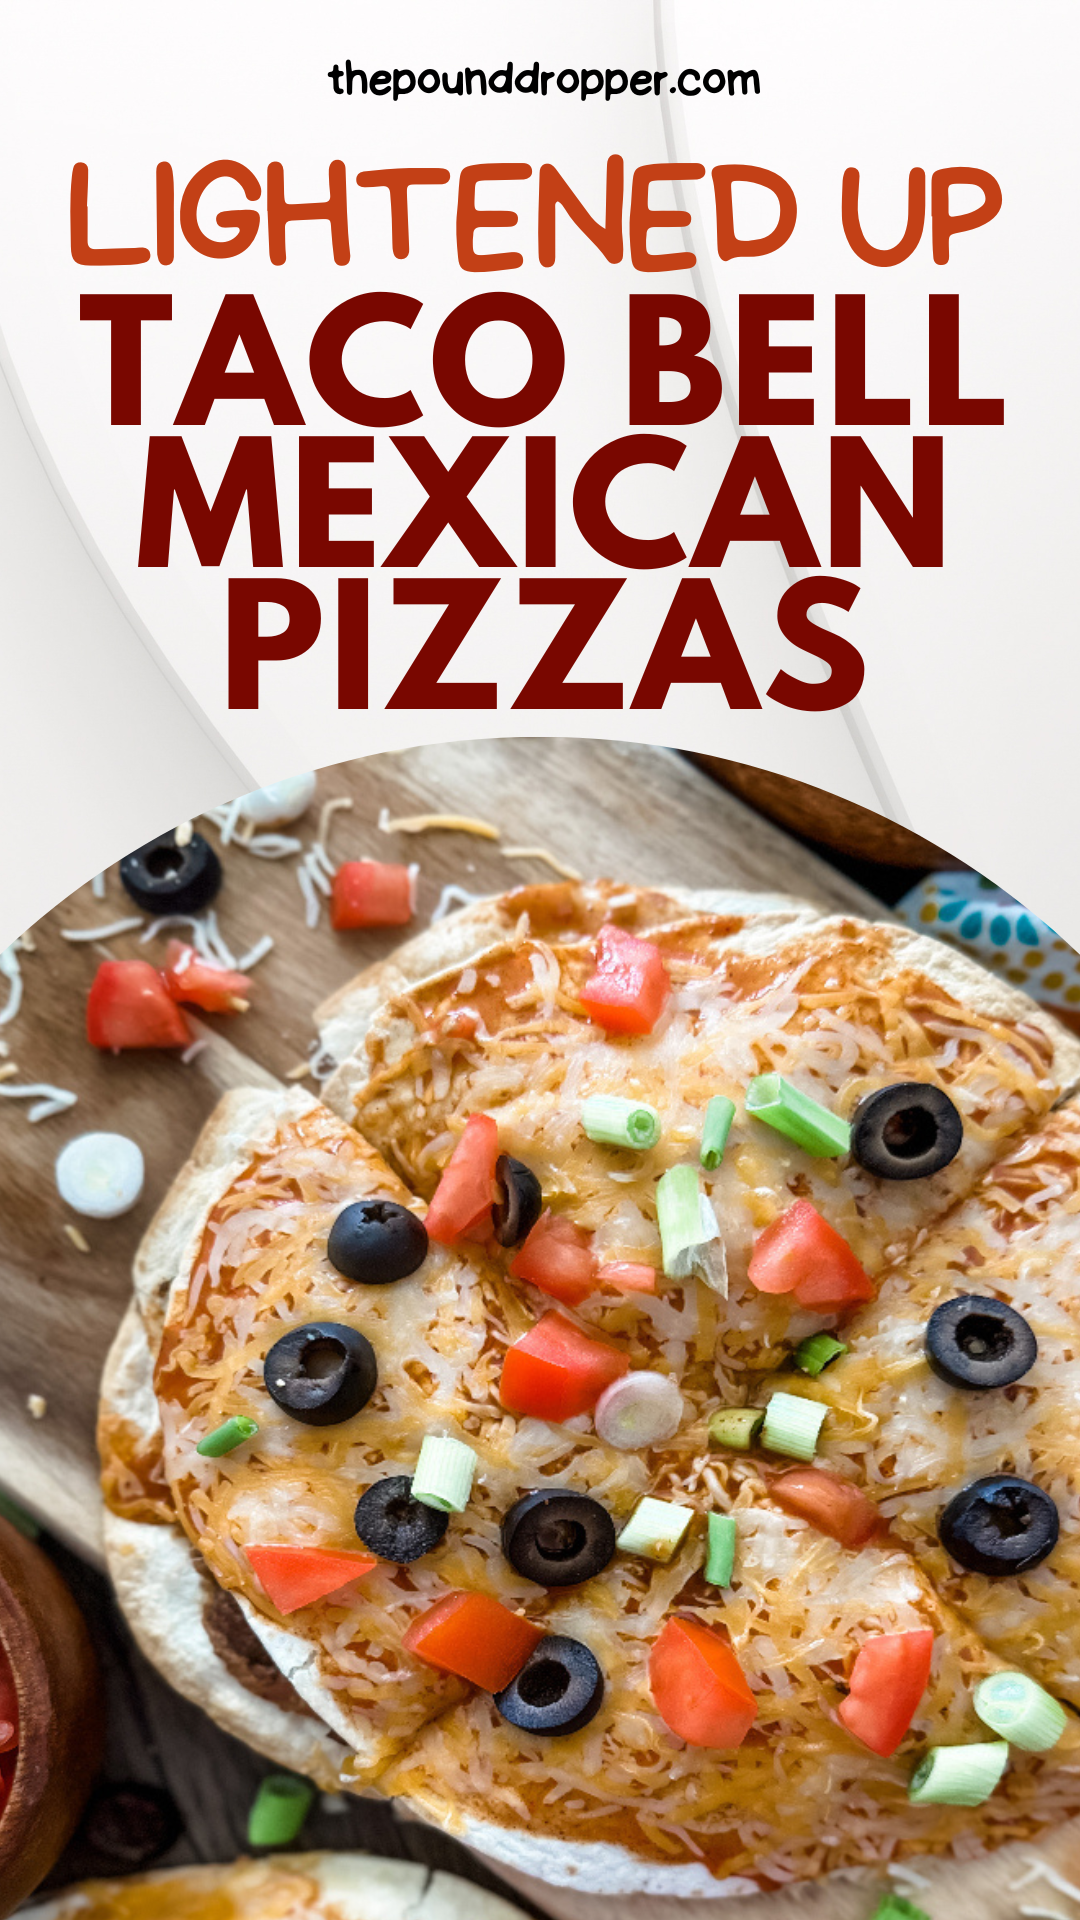 Lightened Up Taco Bell Copycat Mexican Pizzas    via @pounddropper